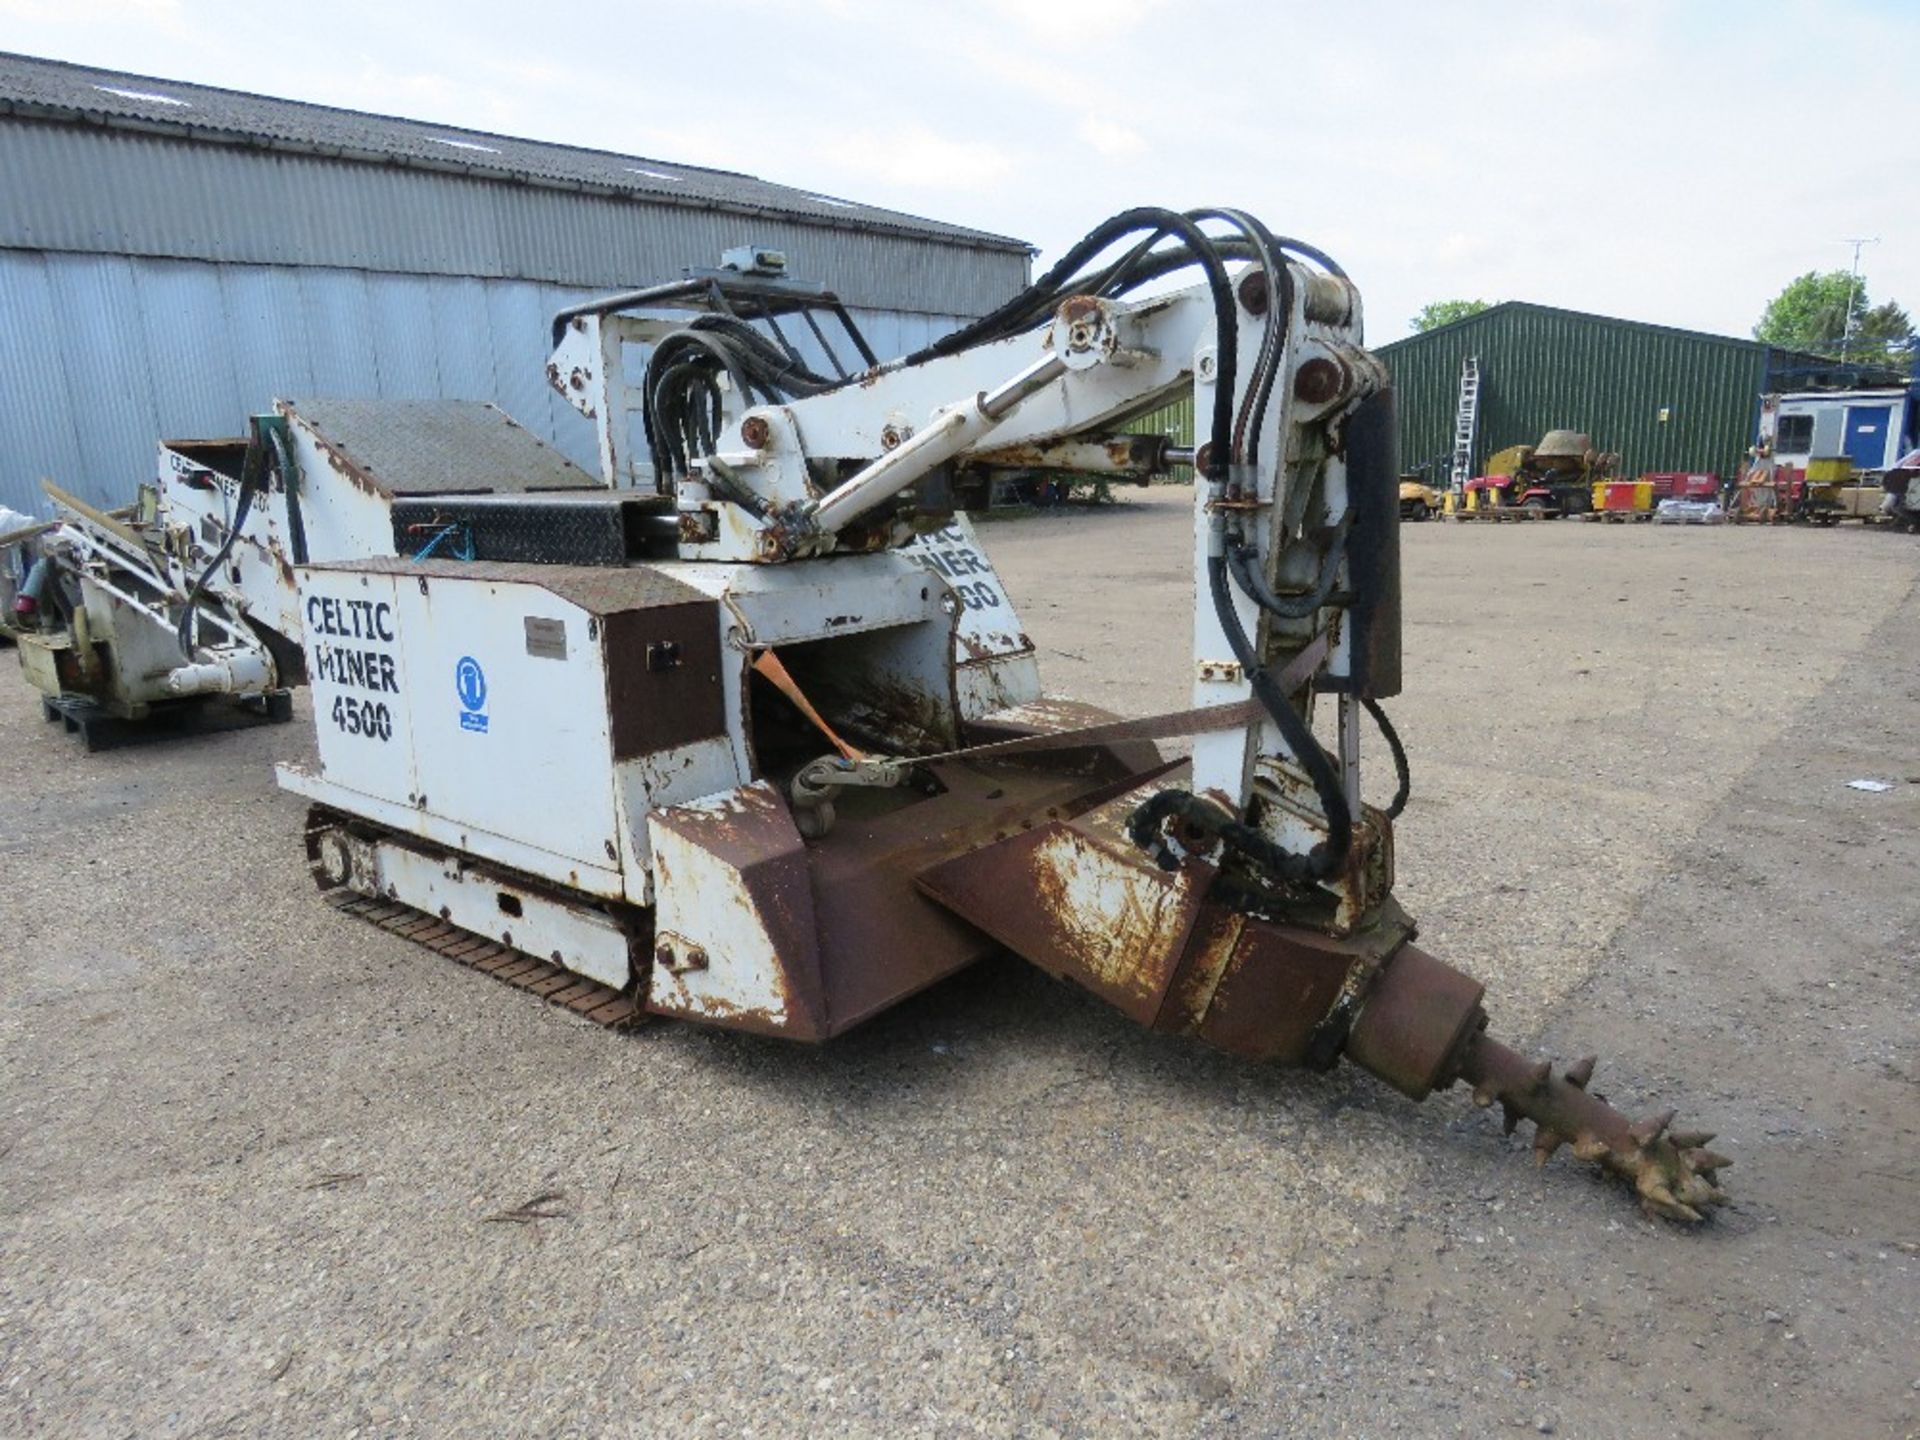 CELTIC MINOR 4500 MK1 ROADHEADER TUNNEL MINING EXCAVATOR MACHINE MANUFACTURED BY METAL INNOVATIONS L - Image 2 of 25